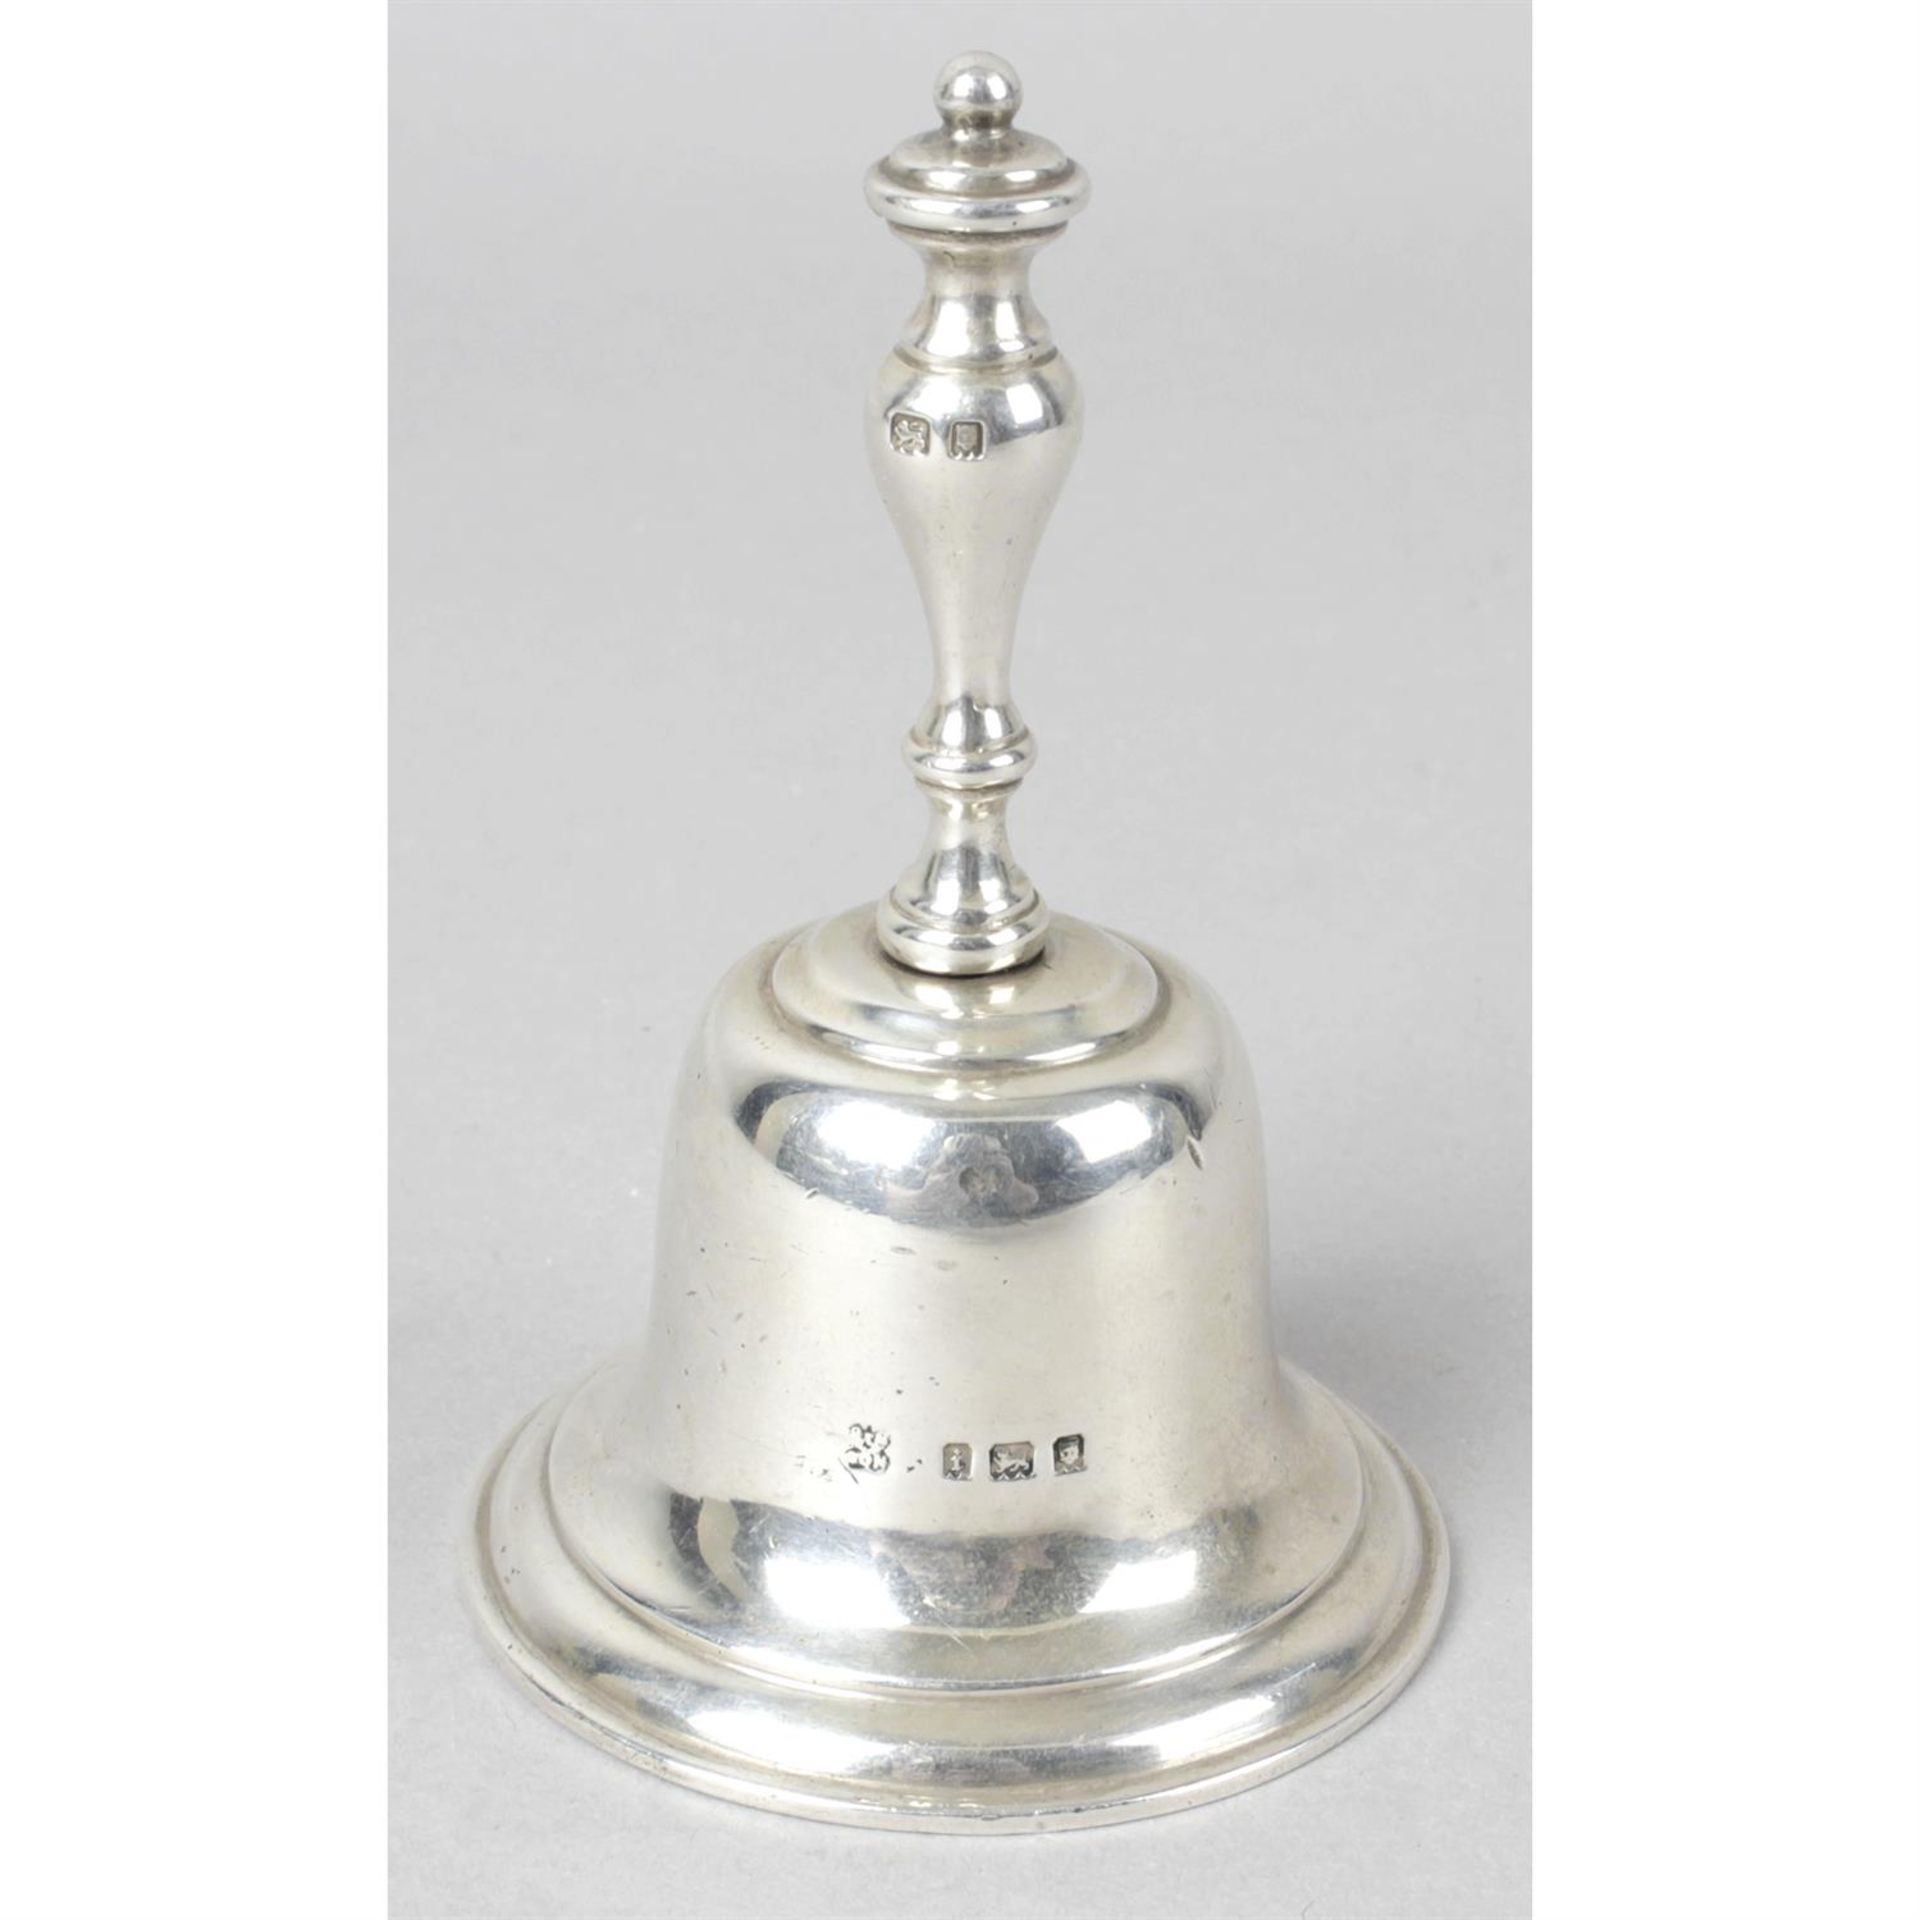 A 1920's small silver table bell.